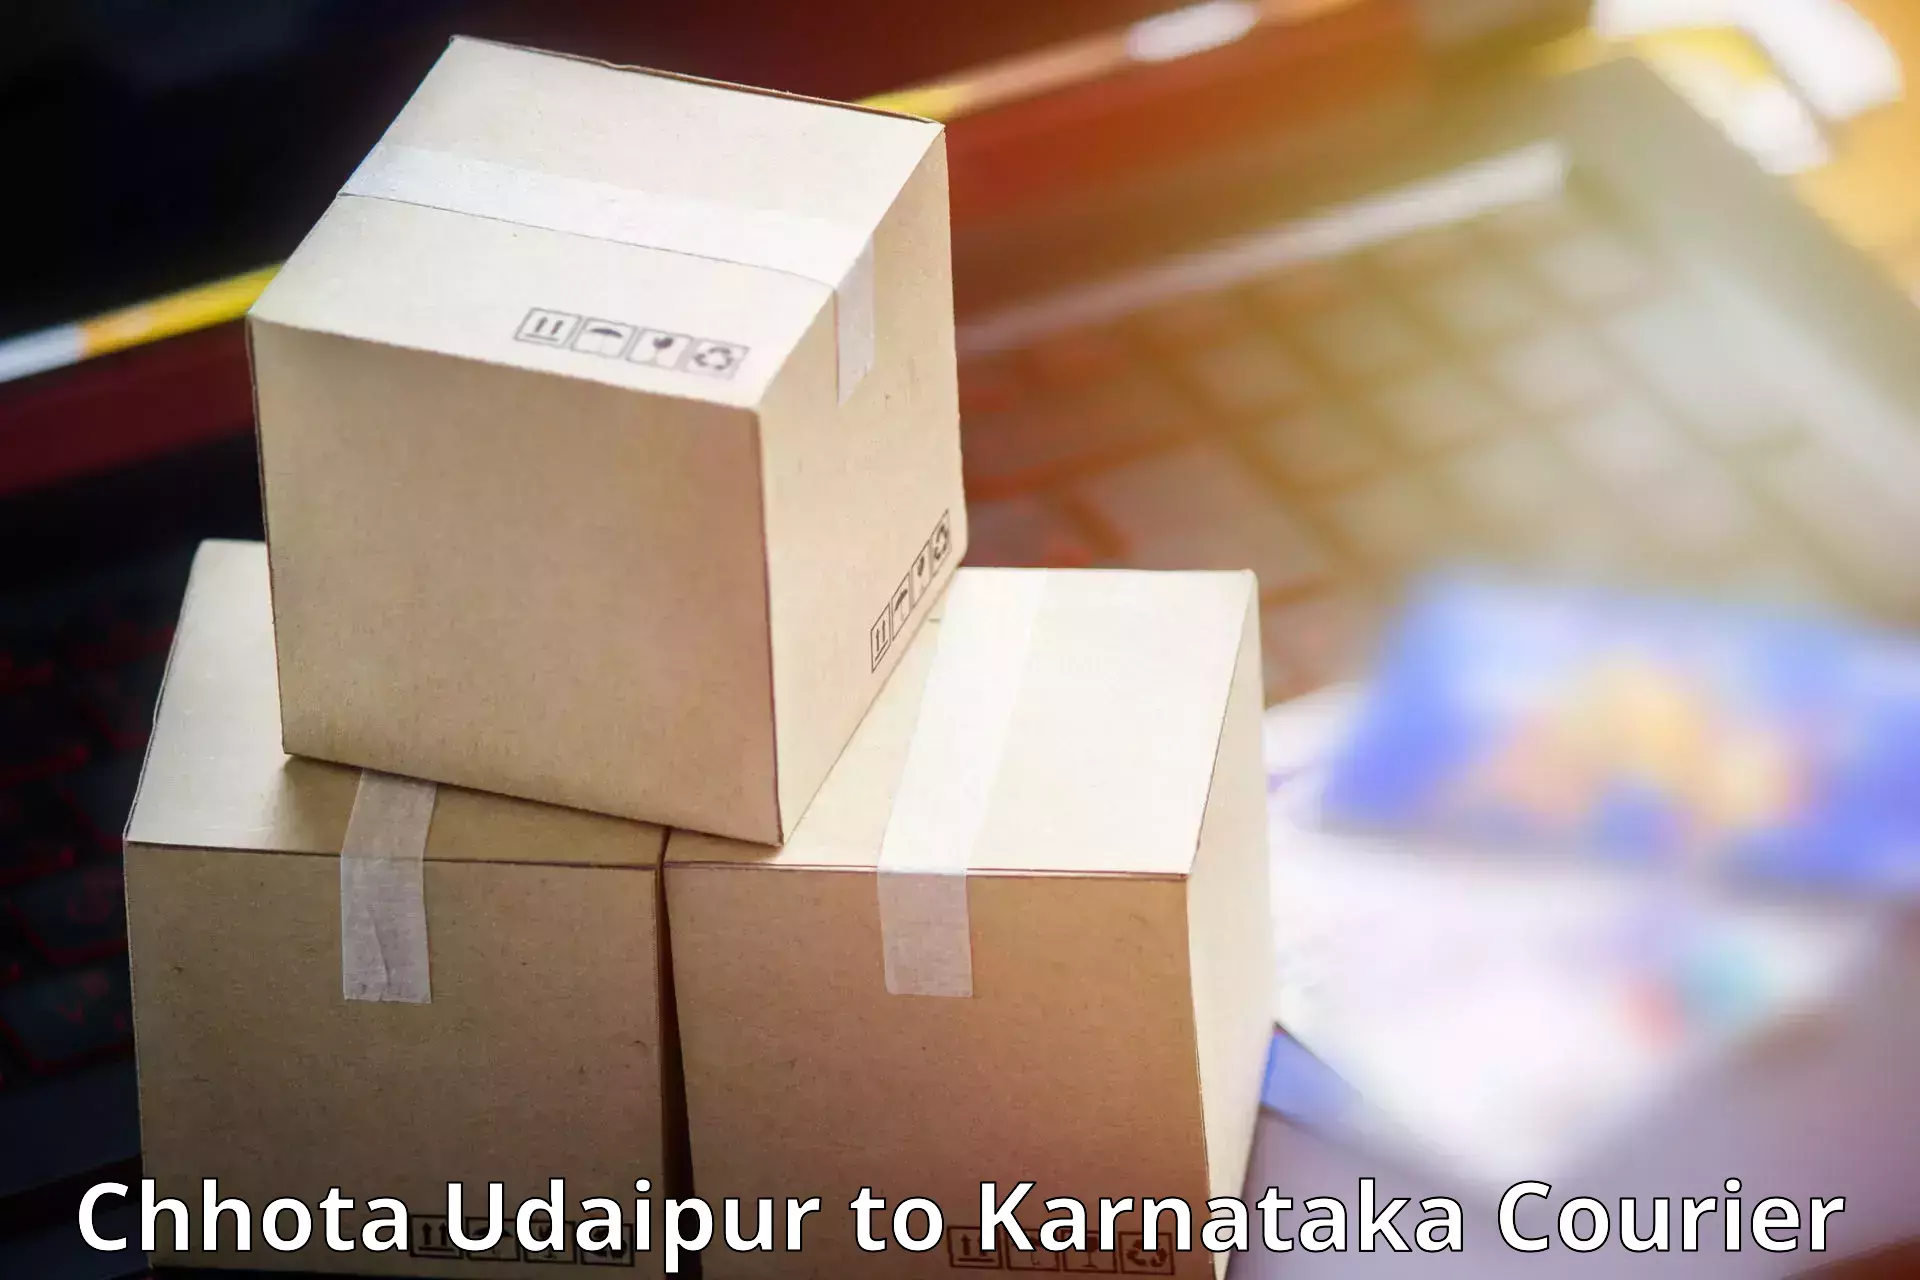 Reliable courier service in Chhota Udaipur to Nelamangala